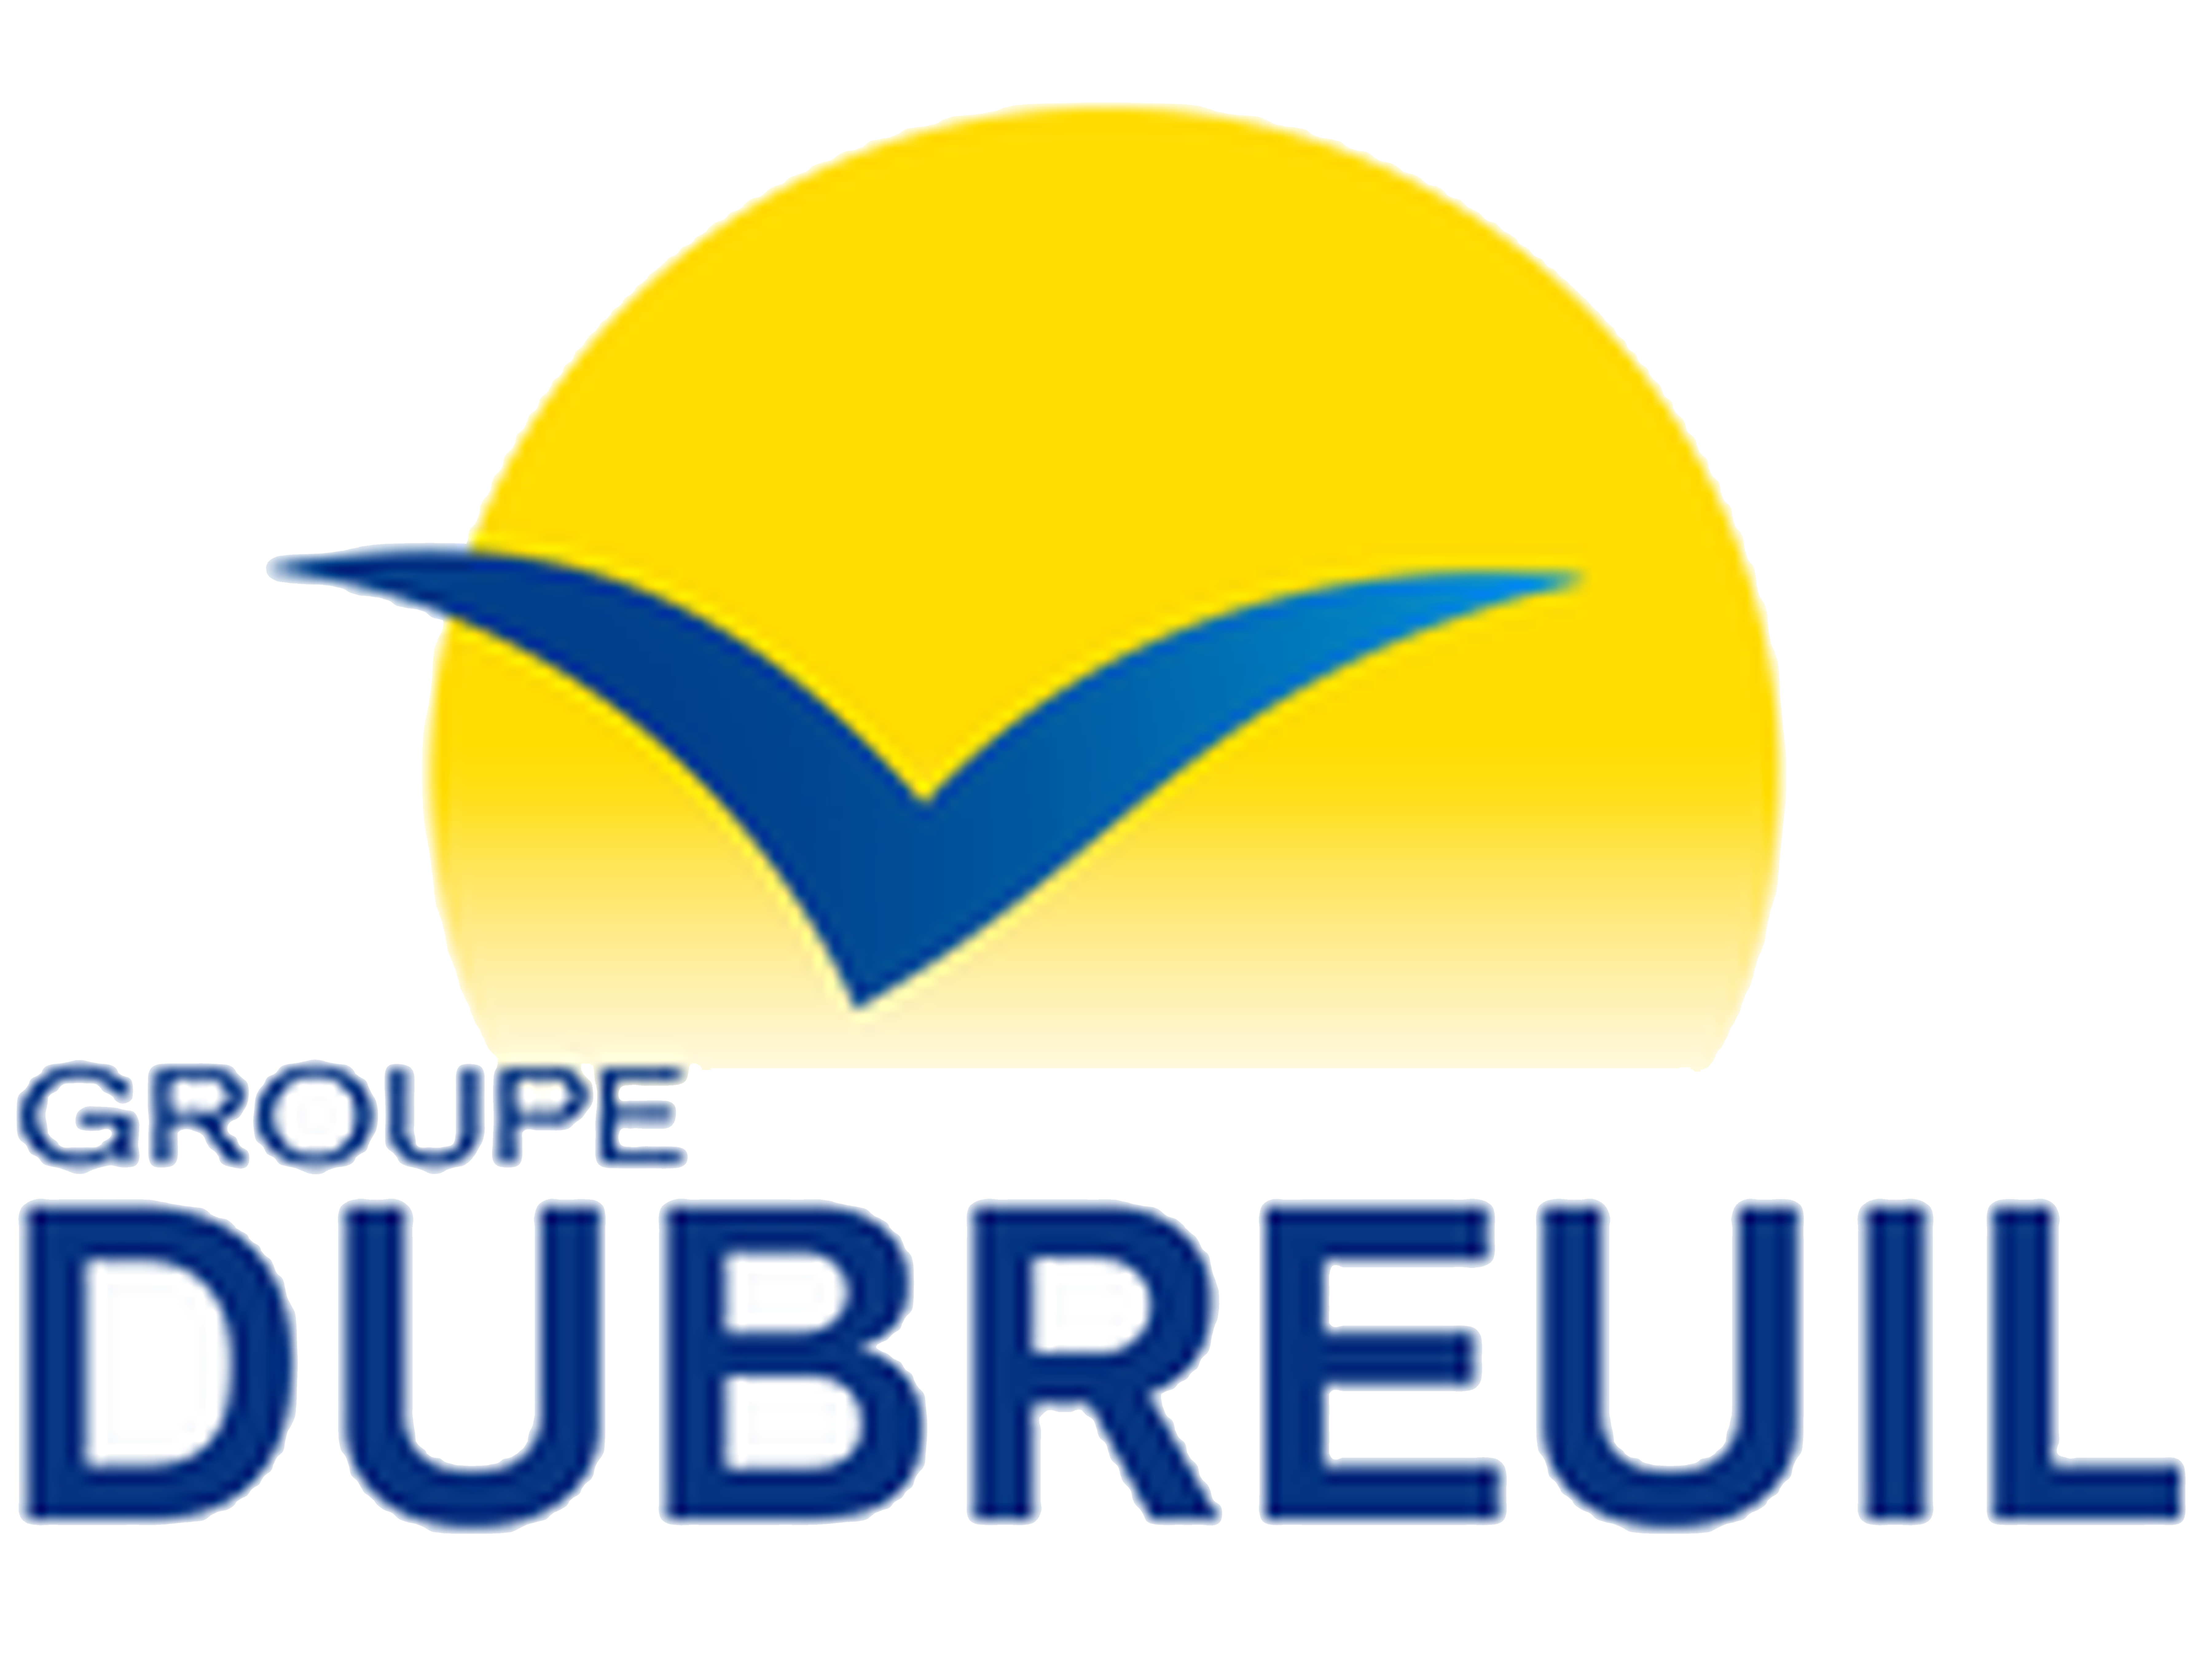 DUBREUIL.png